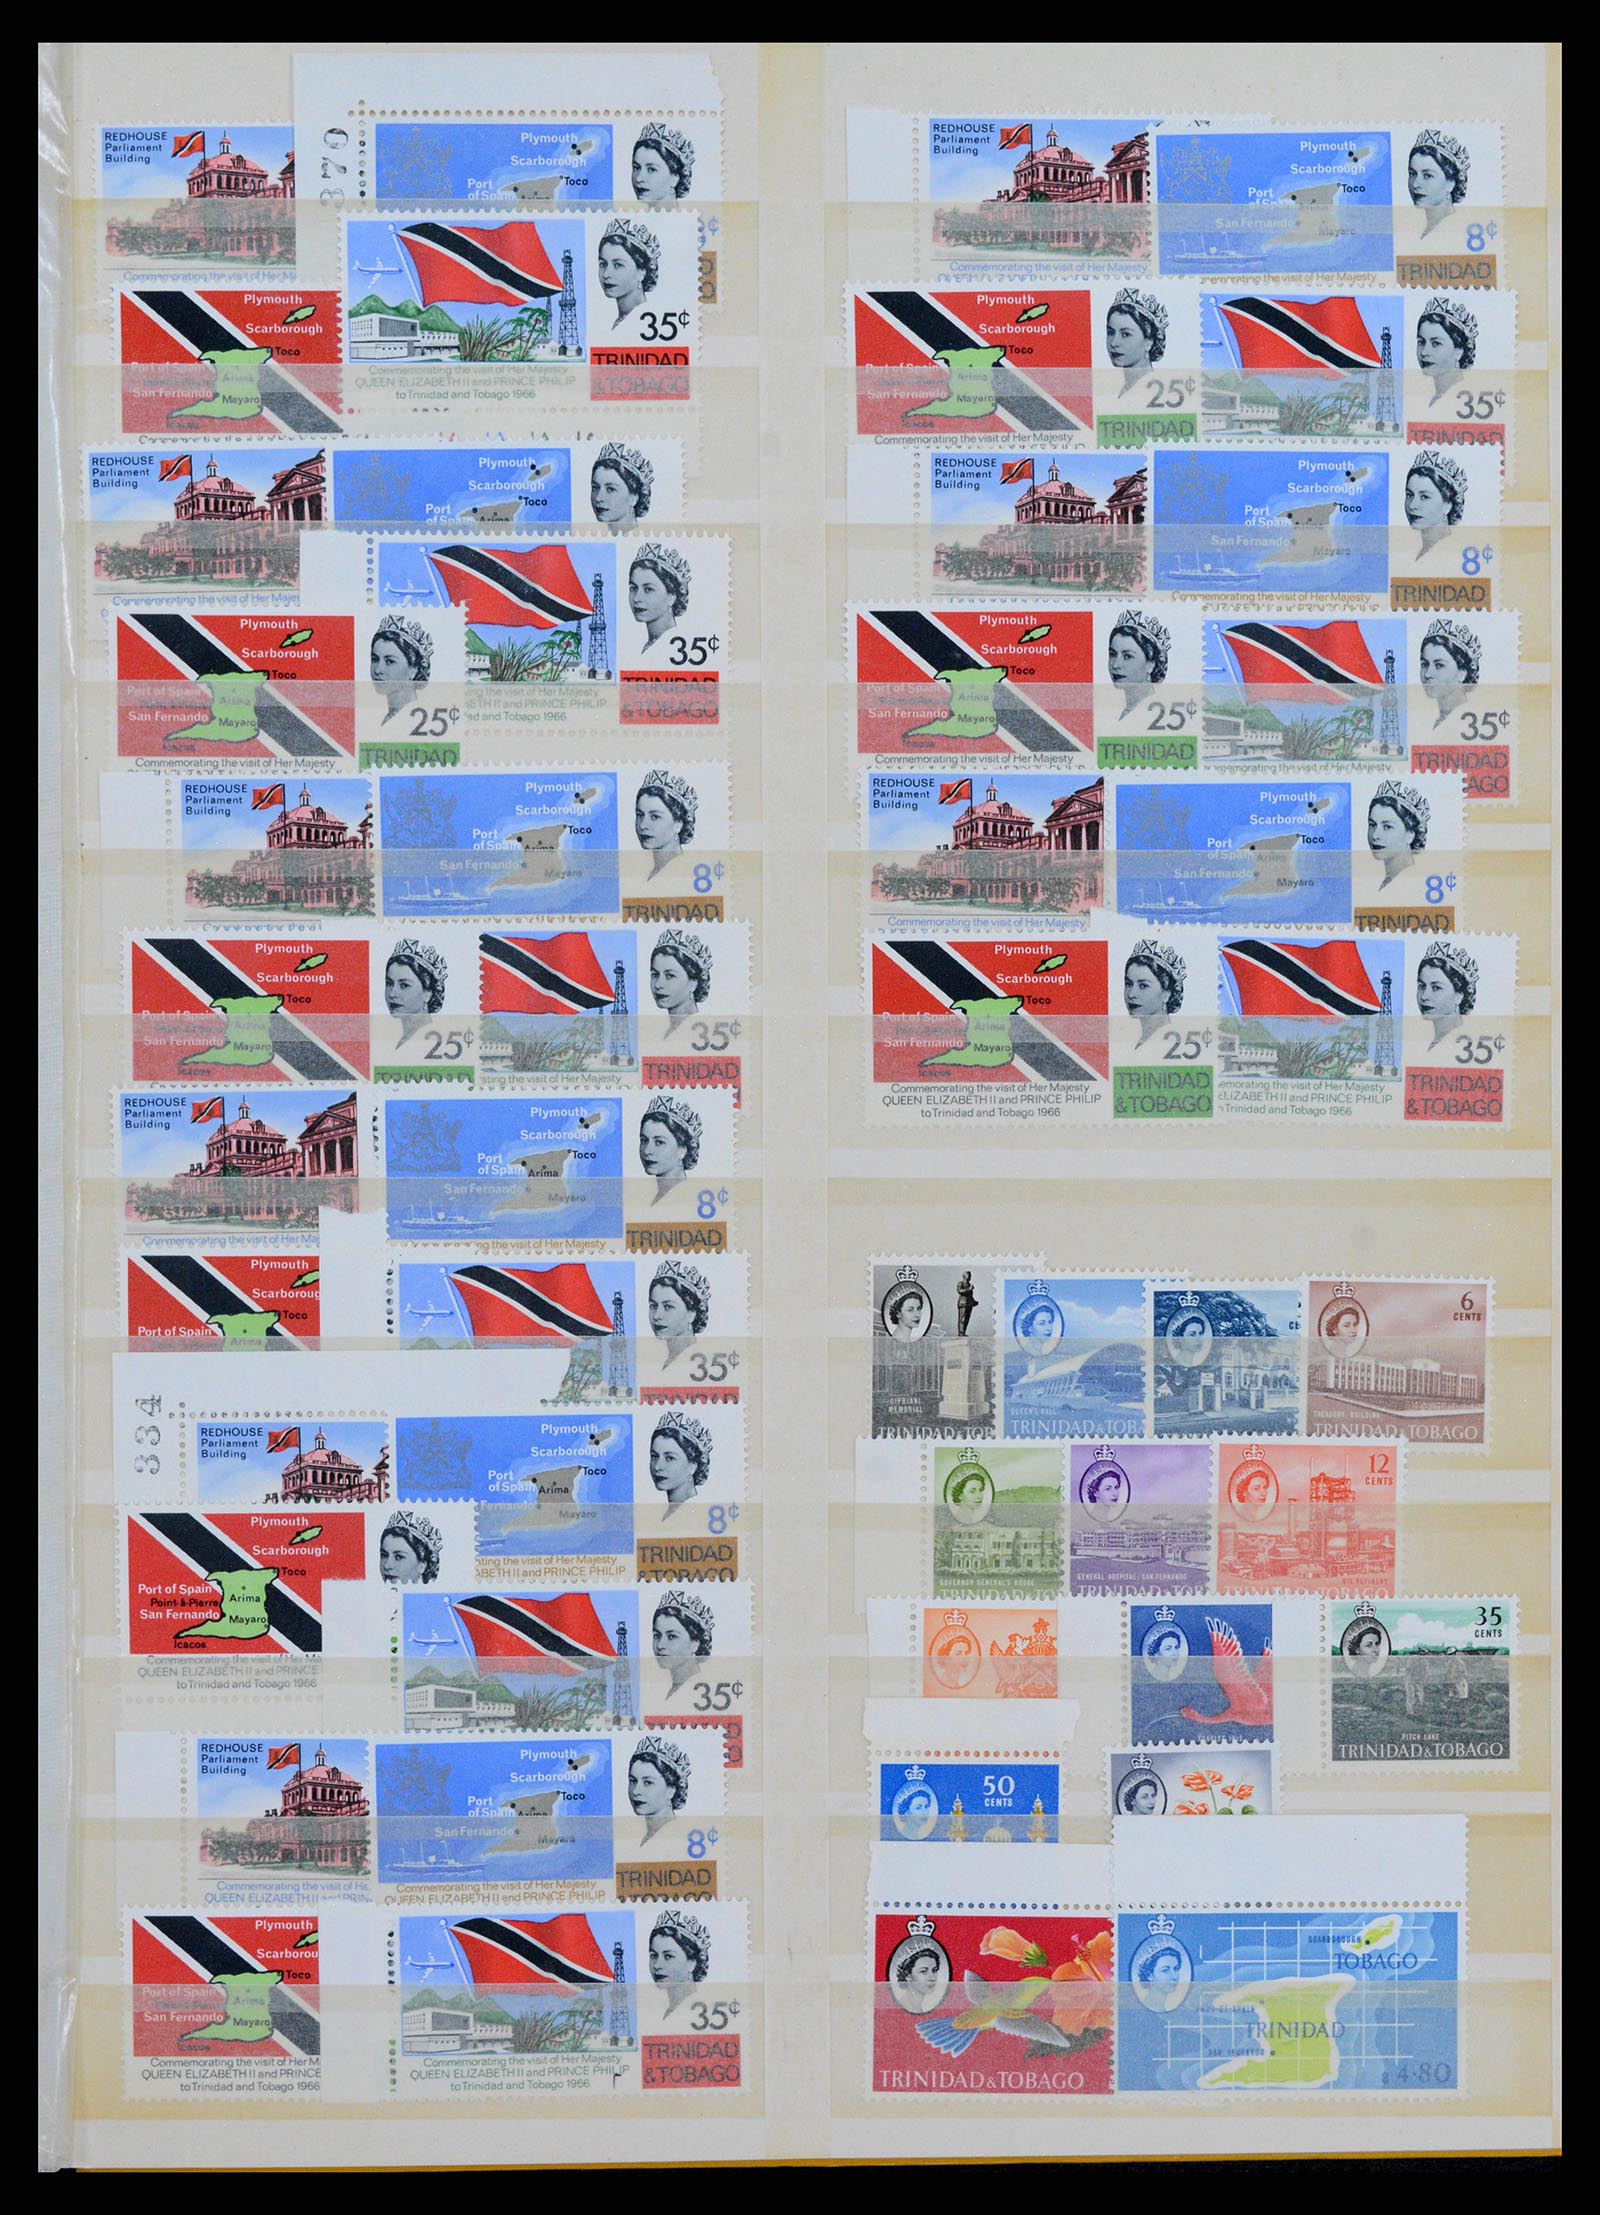 38072 0036 - Stamp collection 38072 English territories in the Caribbean 1960s-1970s.